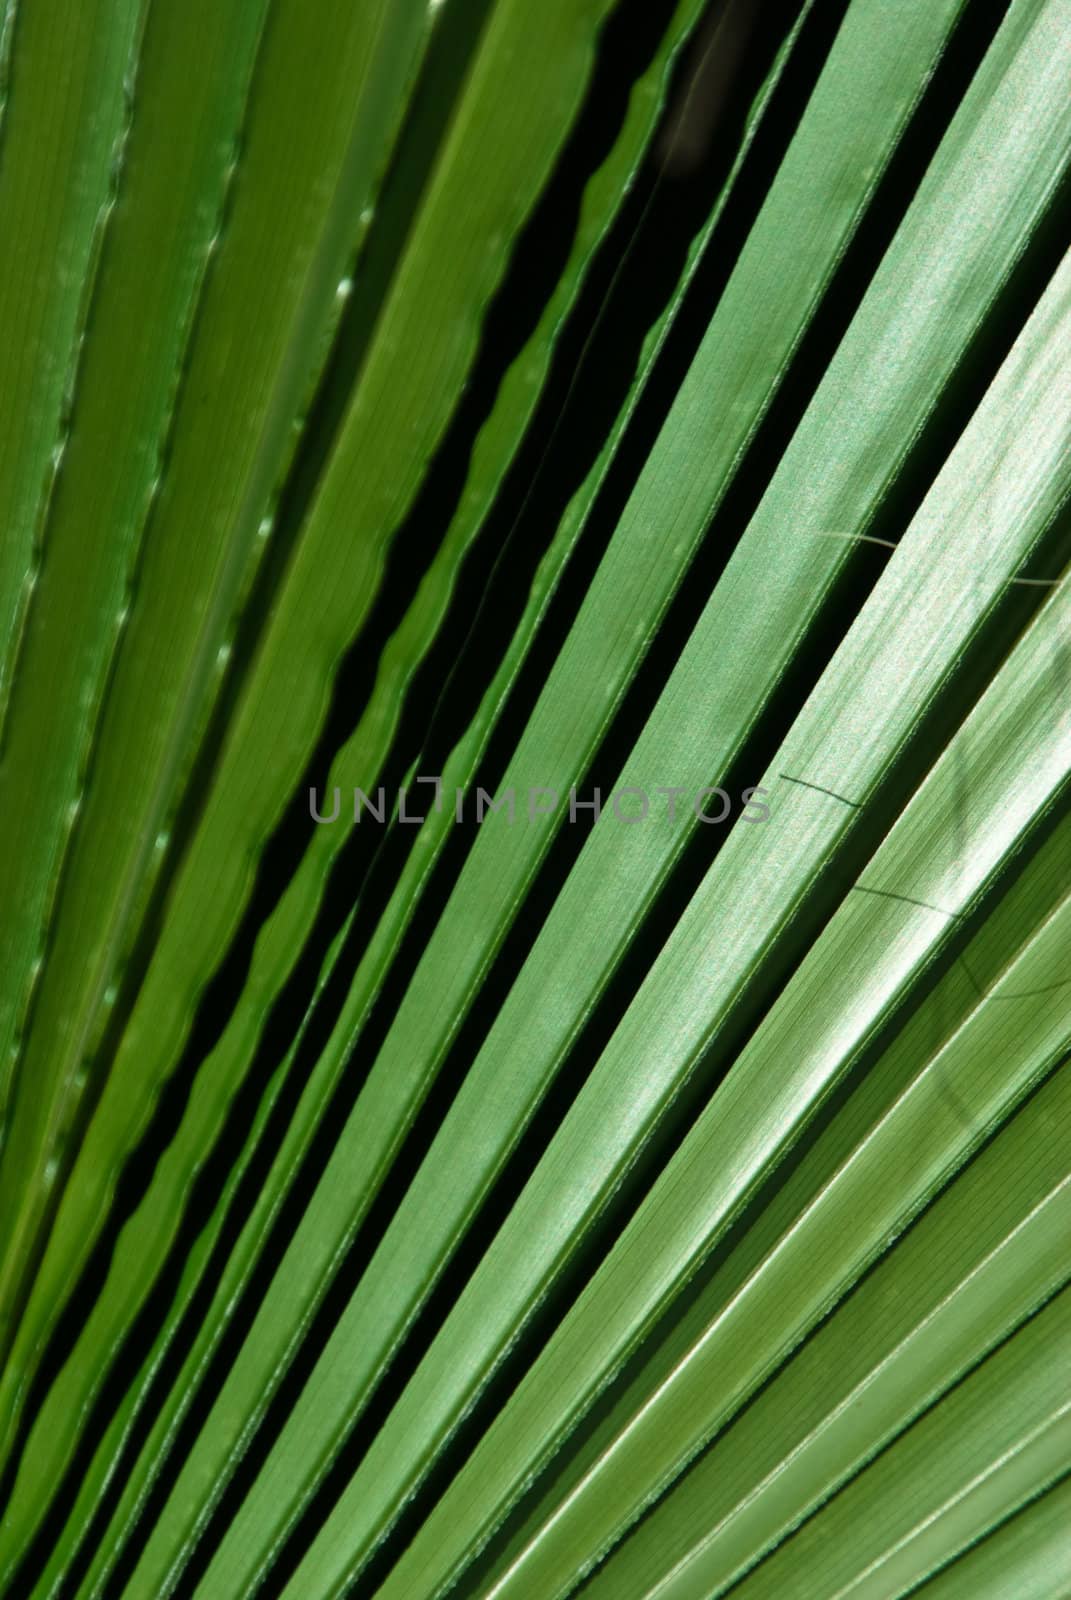 Light and shadow play on green palm fronds